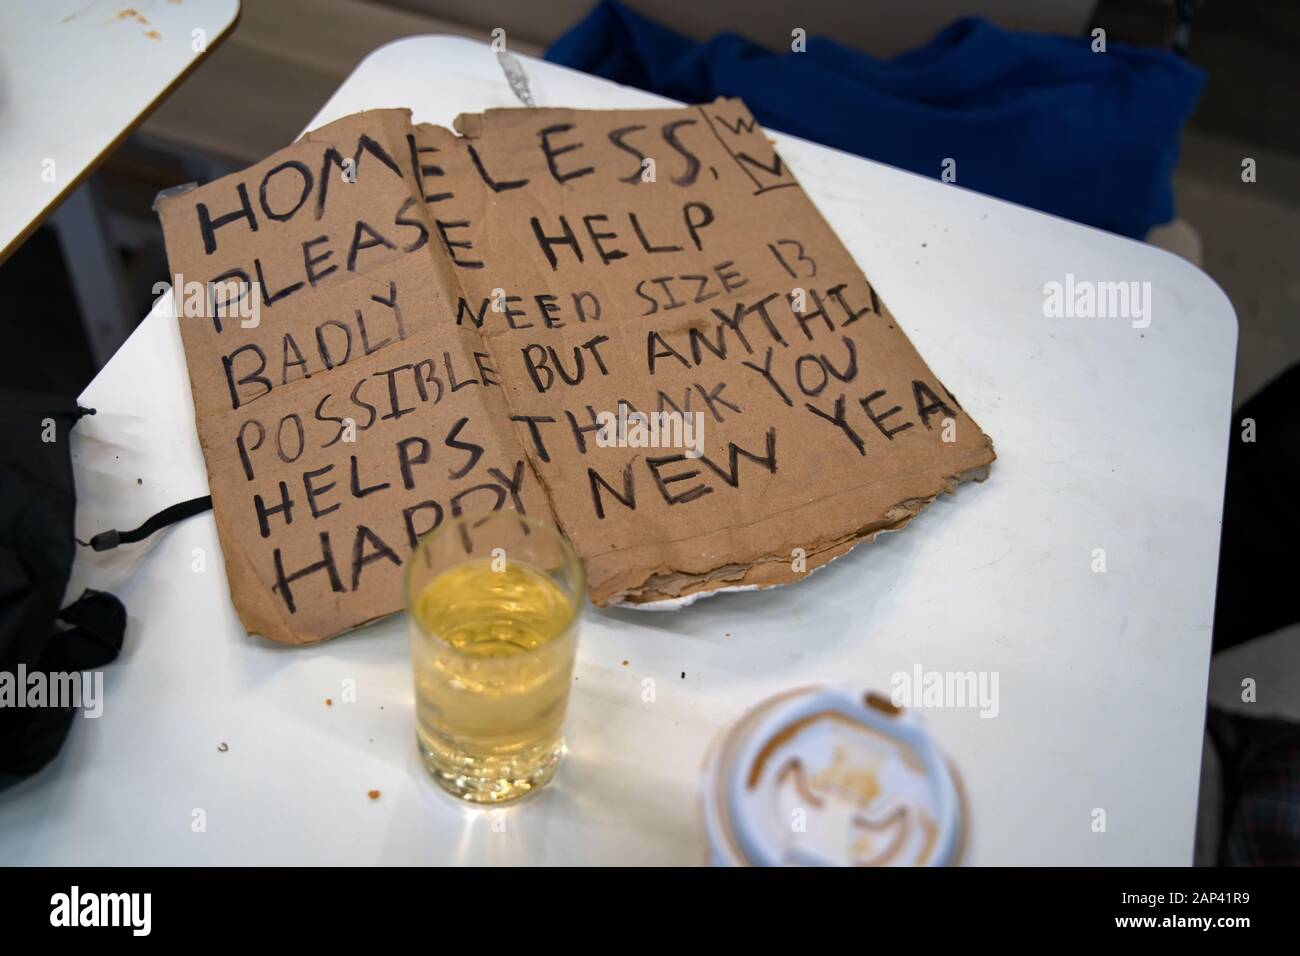 A homeless man`s sign sitting on a restaurant table beside refreshments and personal belongings. Stock Photo